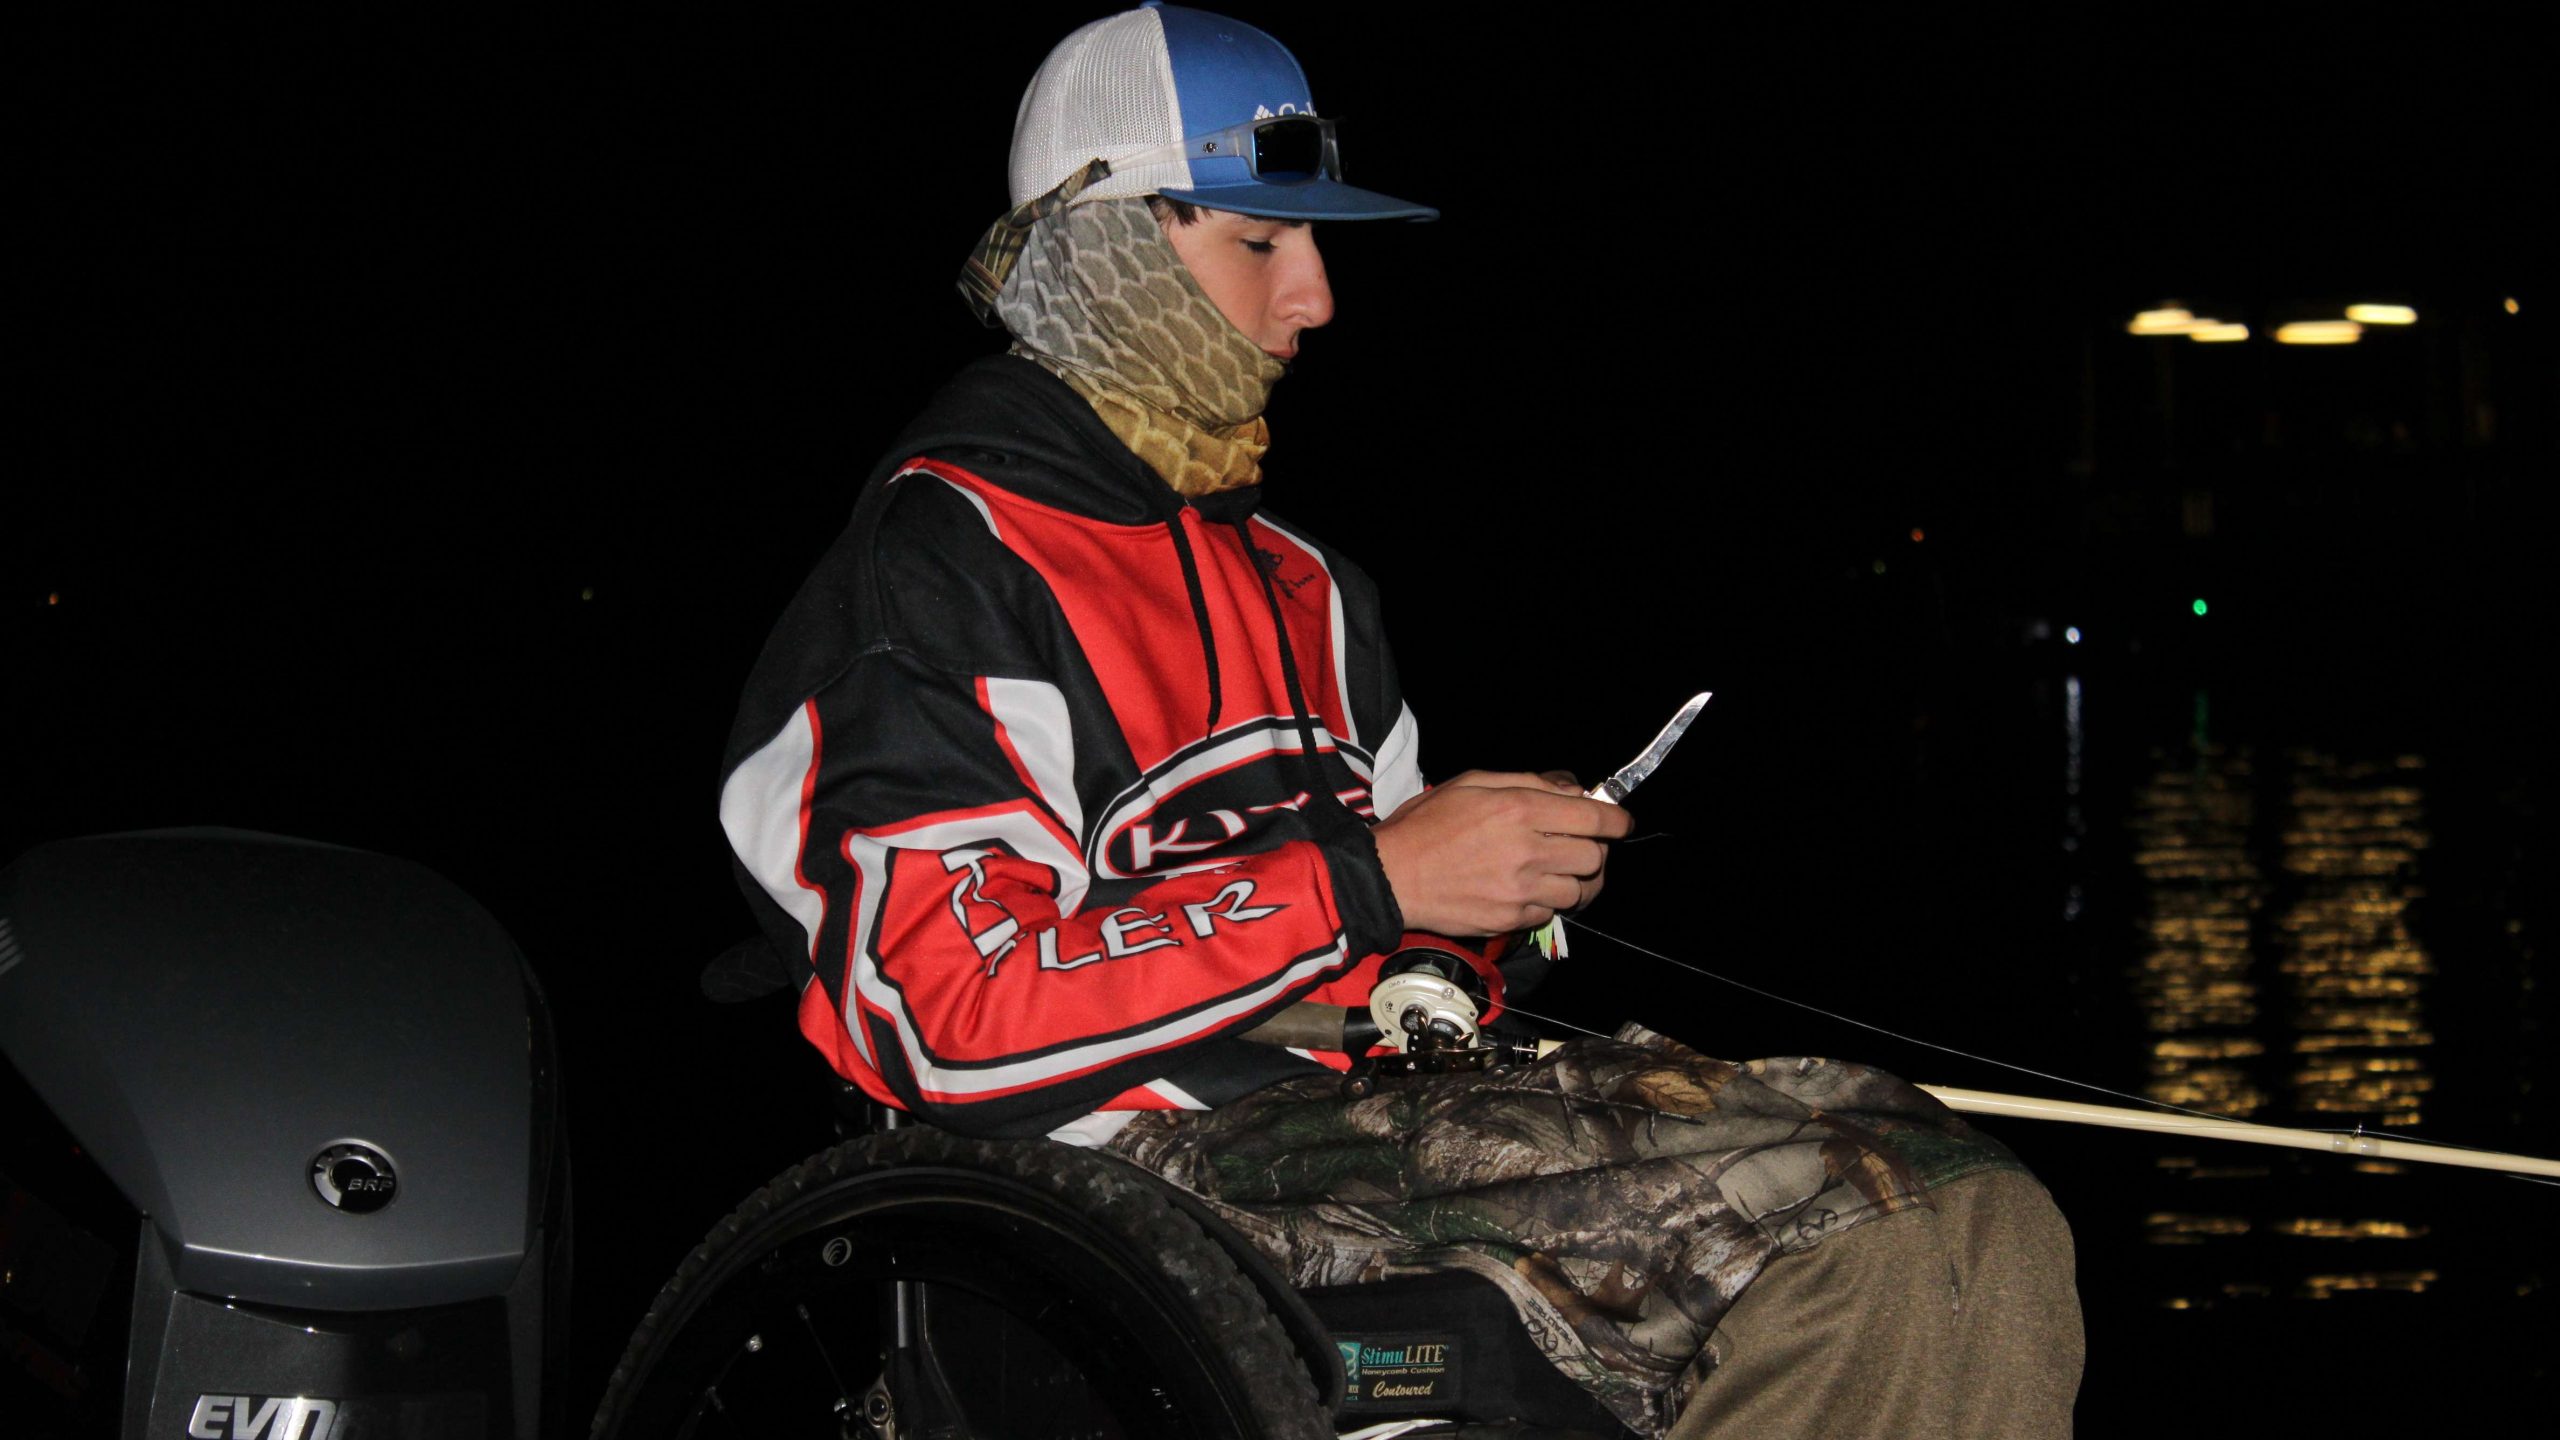 Tucker Roe of Natchitoches Central (La.) High works on a lure
while awaiting take-off.